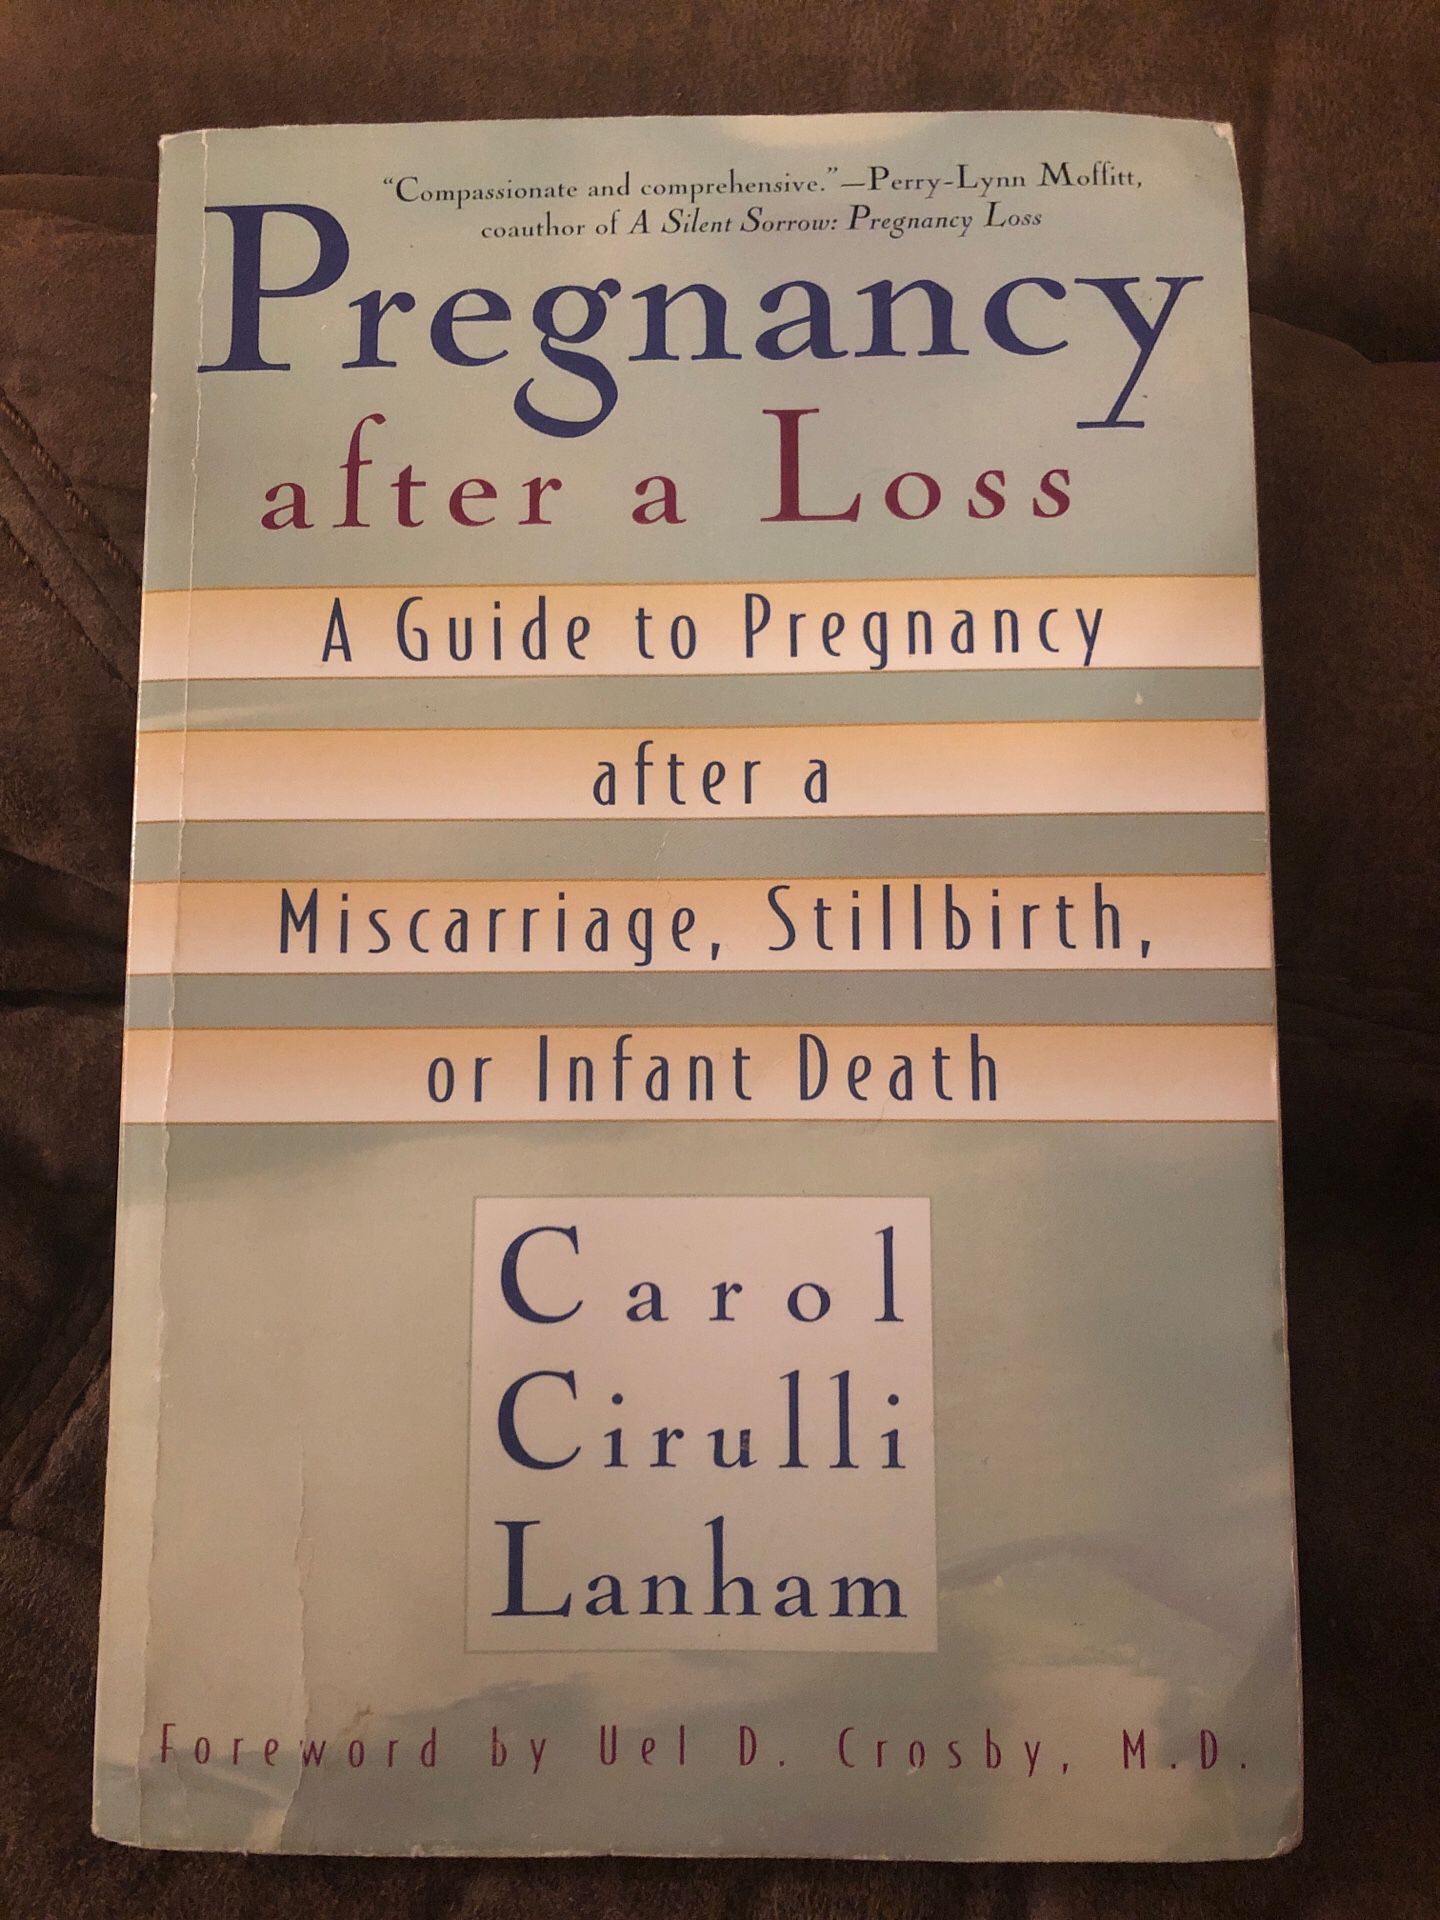 Used book - Pregnancy after a Loss